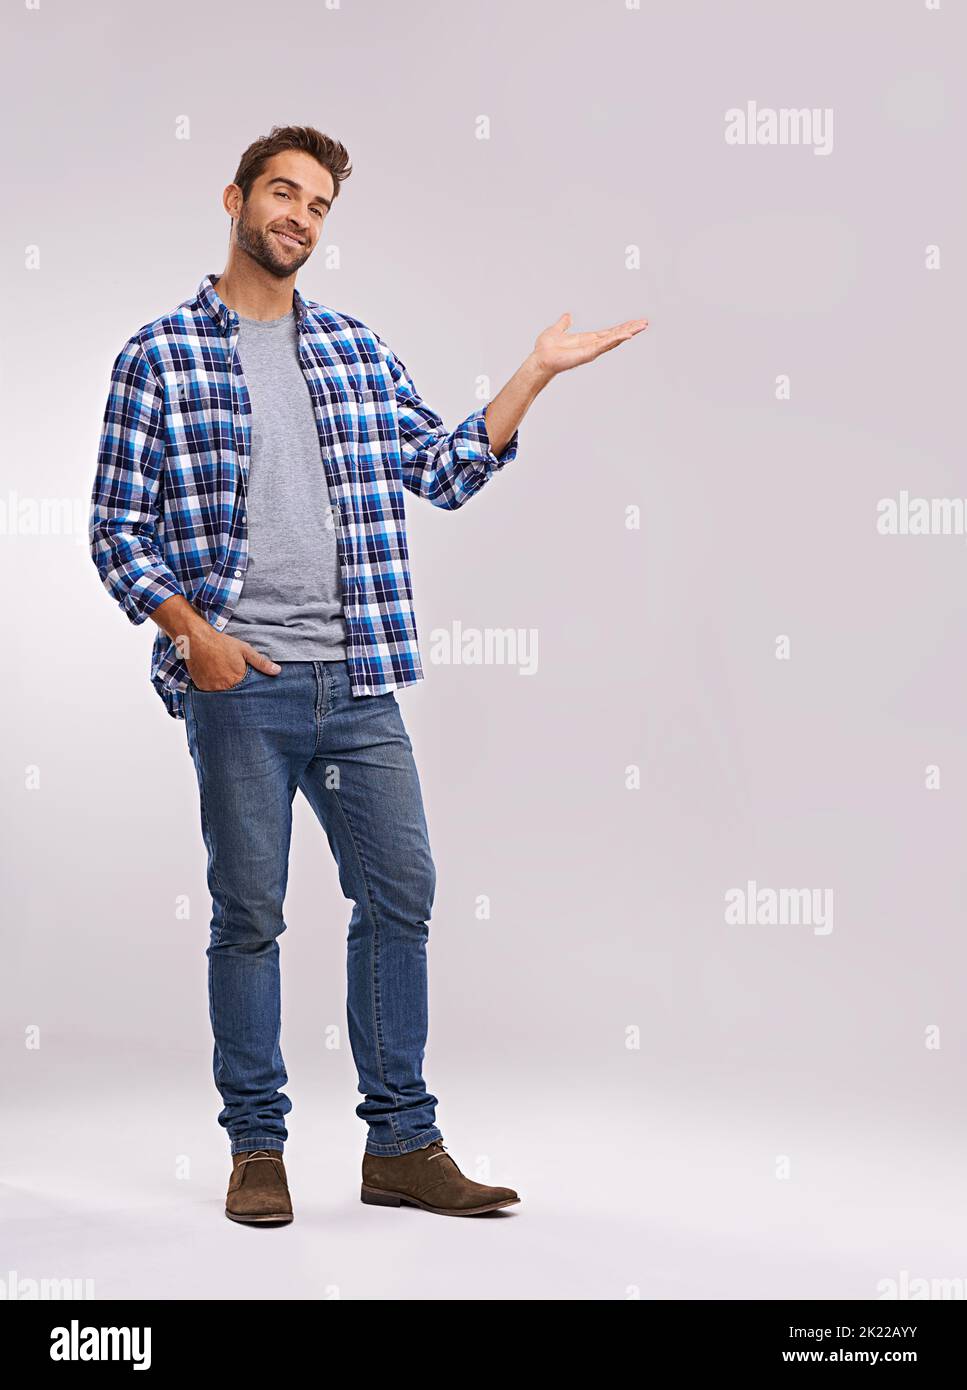 Check it out. Studio shot of a handsome man showing you copyspace against a gray background. Stock Photo